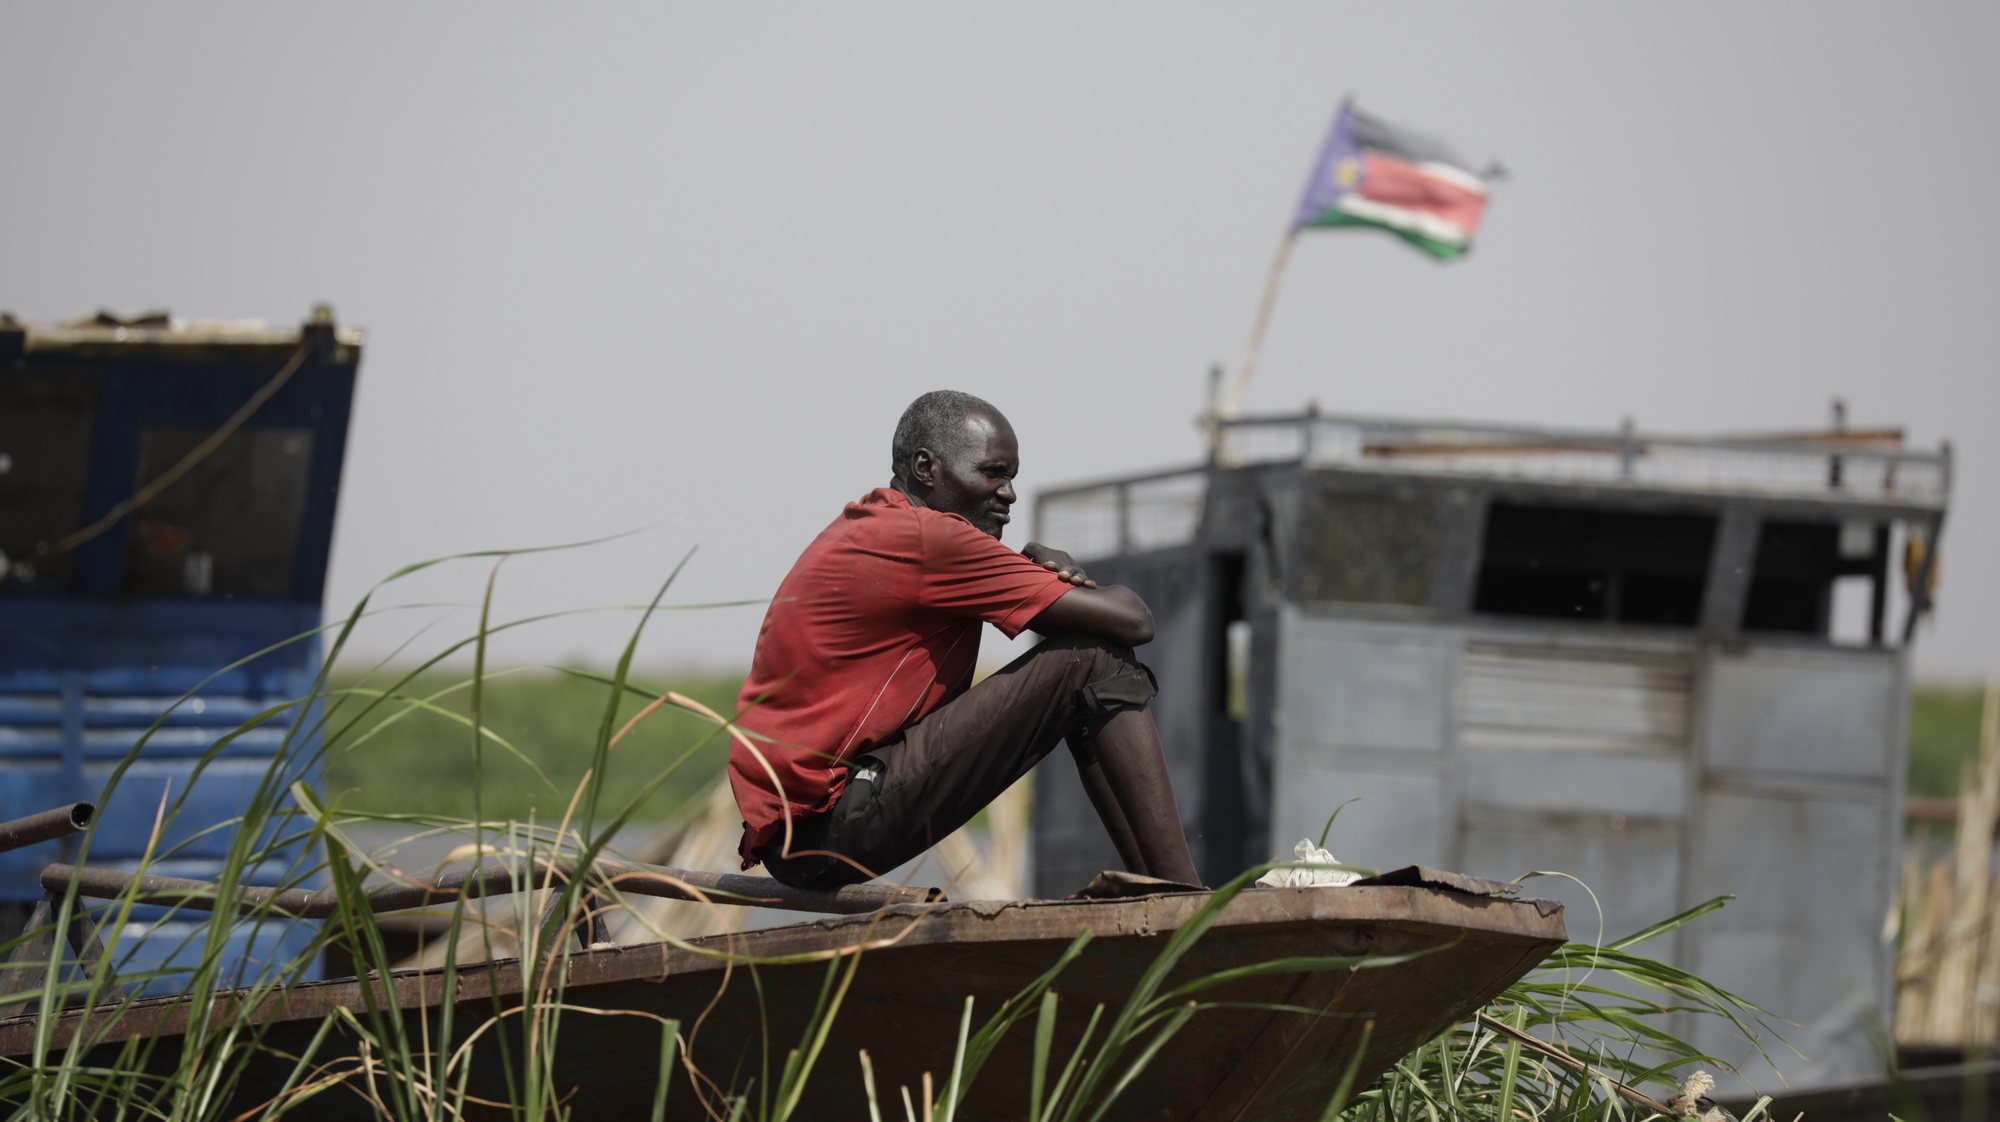 epa10629414 A South Sudanese man looks on as he sits on a boat on the Nile river at the fluvial port of Renk, in the Upper Nile State town of Renk, South Sudan, 14 May 2023 (issued 15 May 2023). According to Mohajer Mhadi Khalifa, head of the boats union in charge of regulating the transport on the Nile in Renk, five boats are planned to transport the returnees to their areas of origin on the Nile towards the Southern Town of Malakal and other locations. On 14 May 2023 a group of 348 people embarked for the trip, following 577 others who made the same trip the previous day after days of waiting in the fluvial port of Renk. The transport was coordinated and organized by the IOM, Caritas and the RCC (the South Sudanese Relief and Rehabilitation Commission). According to the United Nations, some 200,000 people have fled the conflict in Sudan between 15 April and 12 May 2023. Most of them left towards neighboring countries such as Egypt, Tchad, South Sudan or Ethiopia, and about two million people were internally displaced. Leaving behind them the armed conflict between the Sudanese military and the RSF (Rapid Support Forces) militia, most of the refugees in South Sudan are South Sudanese returnees, part of the some 800,000 who had previously fled the war in South Sudan and who are now returning to a country which is barely out of conflict itself with tensions still remaining in many areas.  EPA/AMEL PAIN ATTENTION: This Image is part of a PHOTO SET